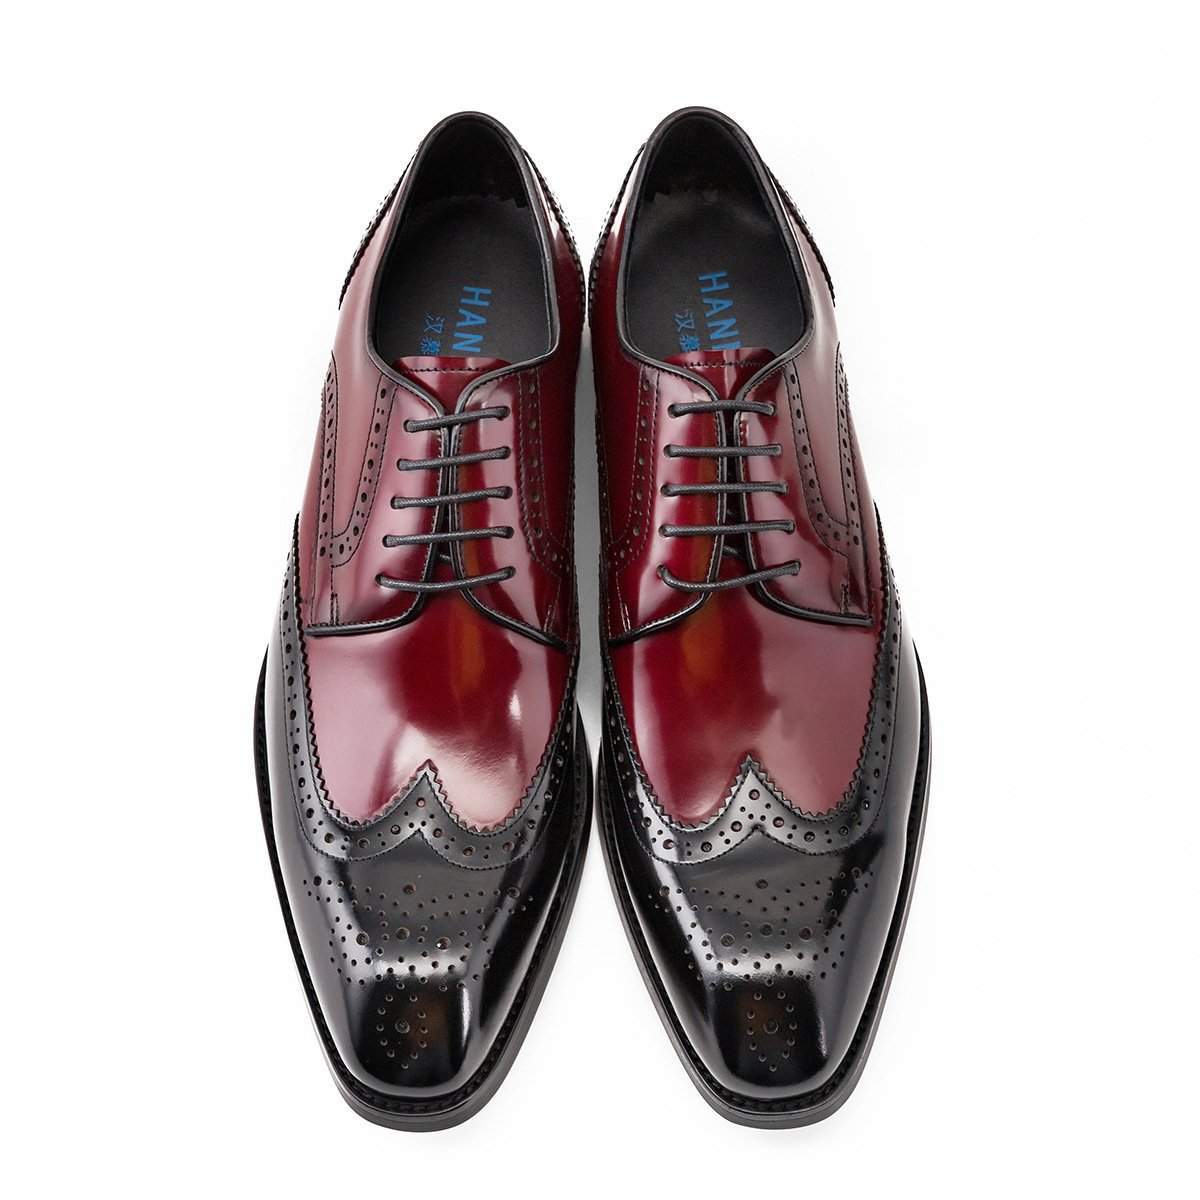 The Pratico. Leather Dress Shoes for Men - Business Red/Black Oxfords